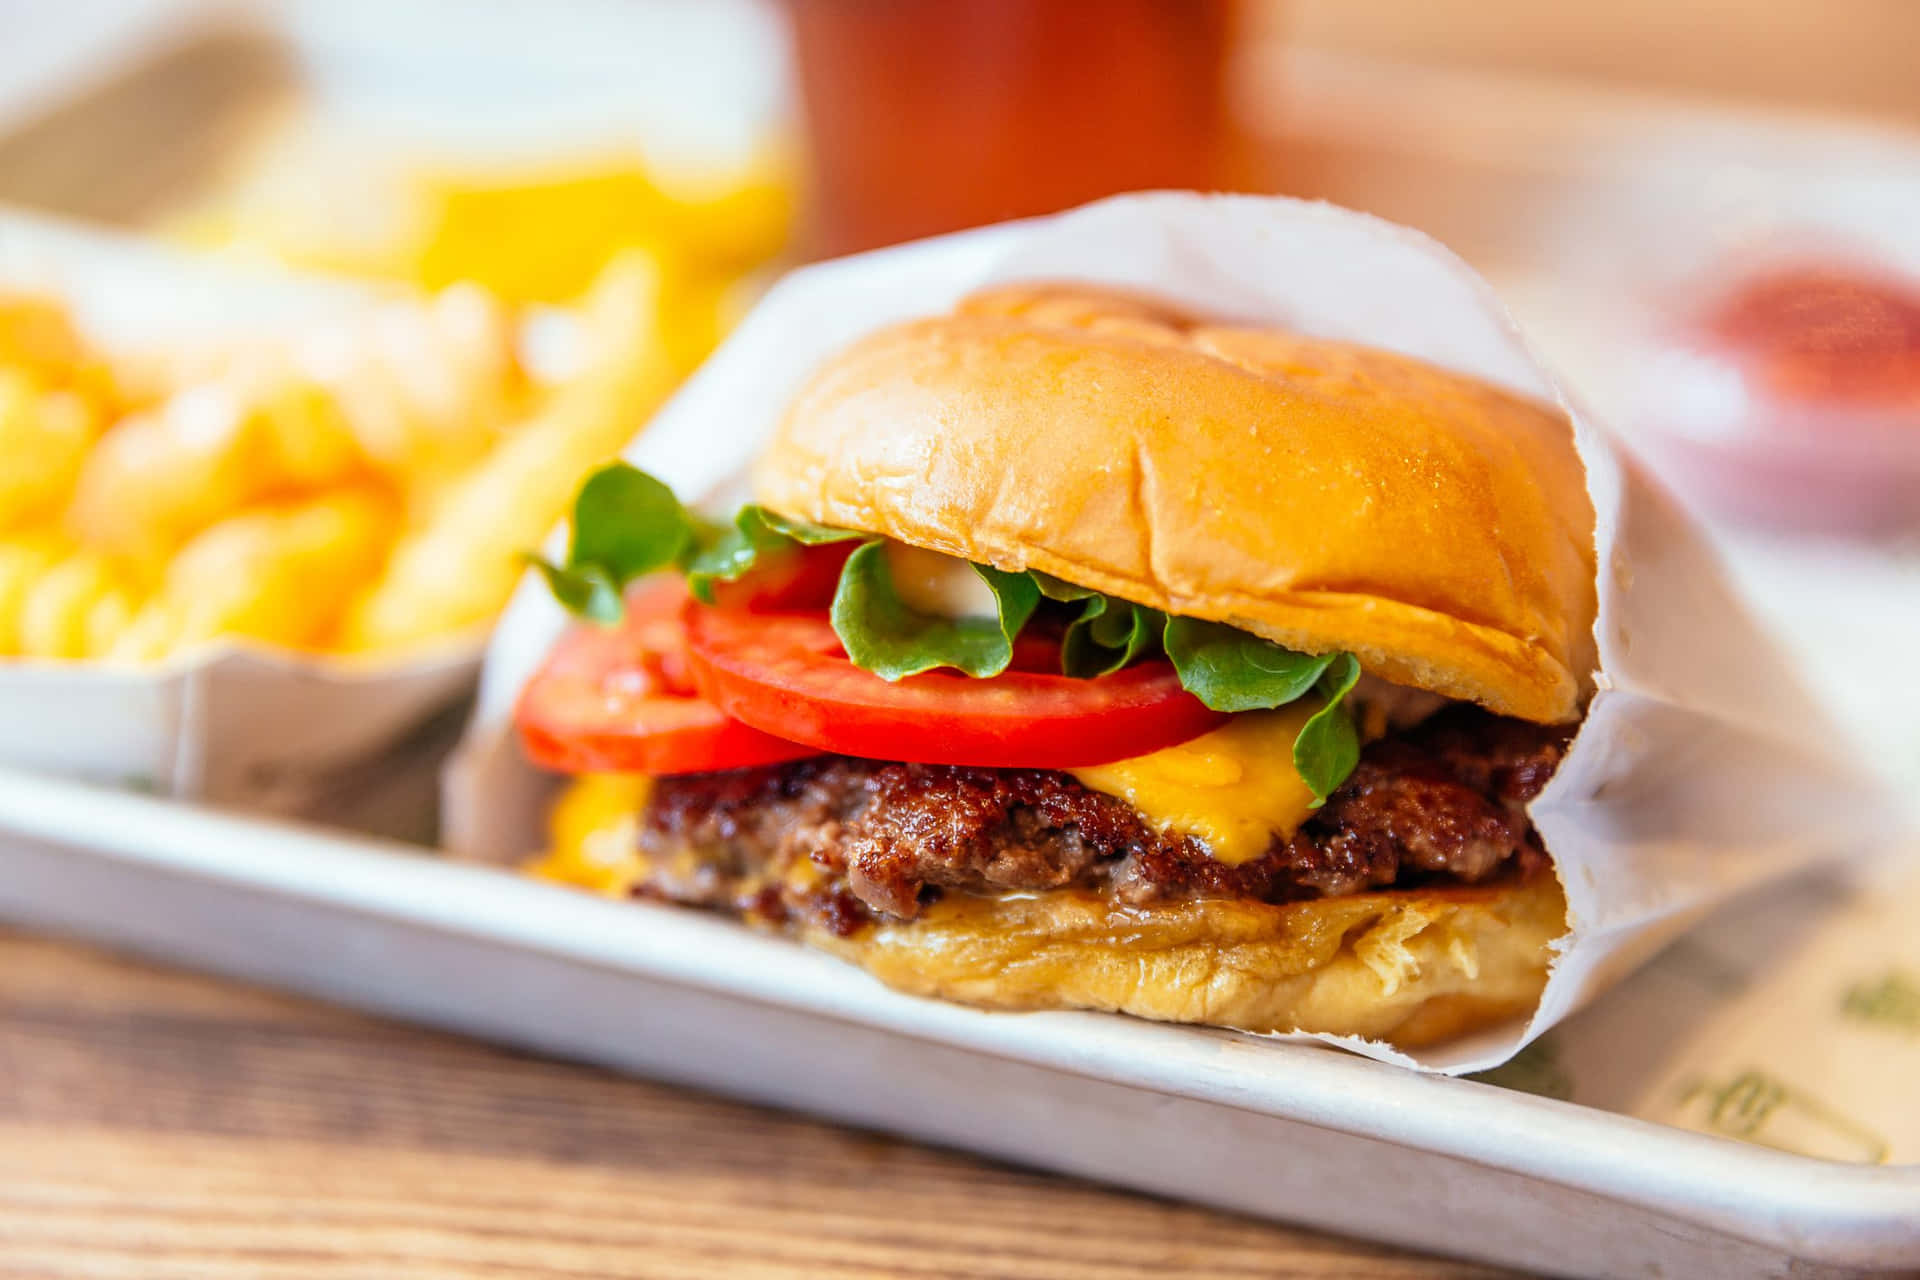 Delicious burgers, wraps and fries - the perfect fast food meal